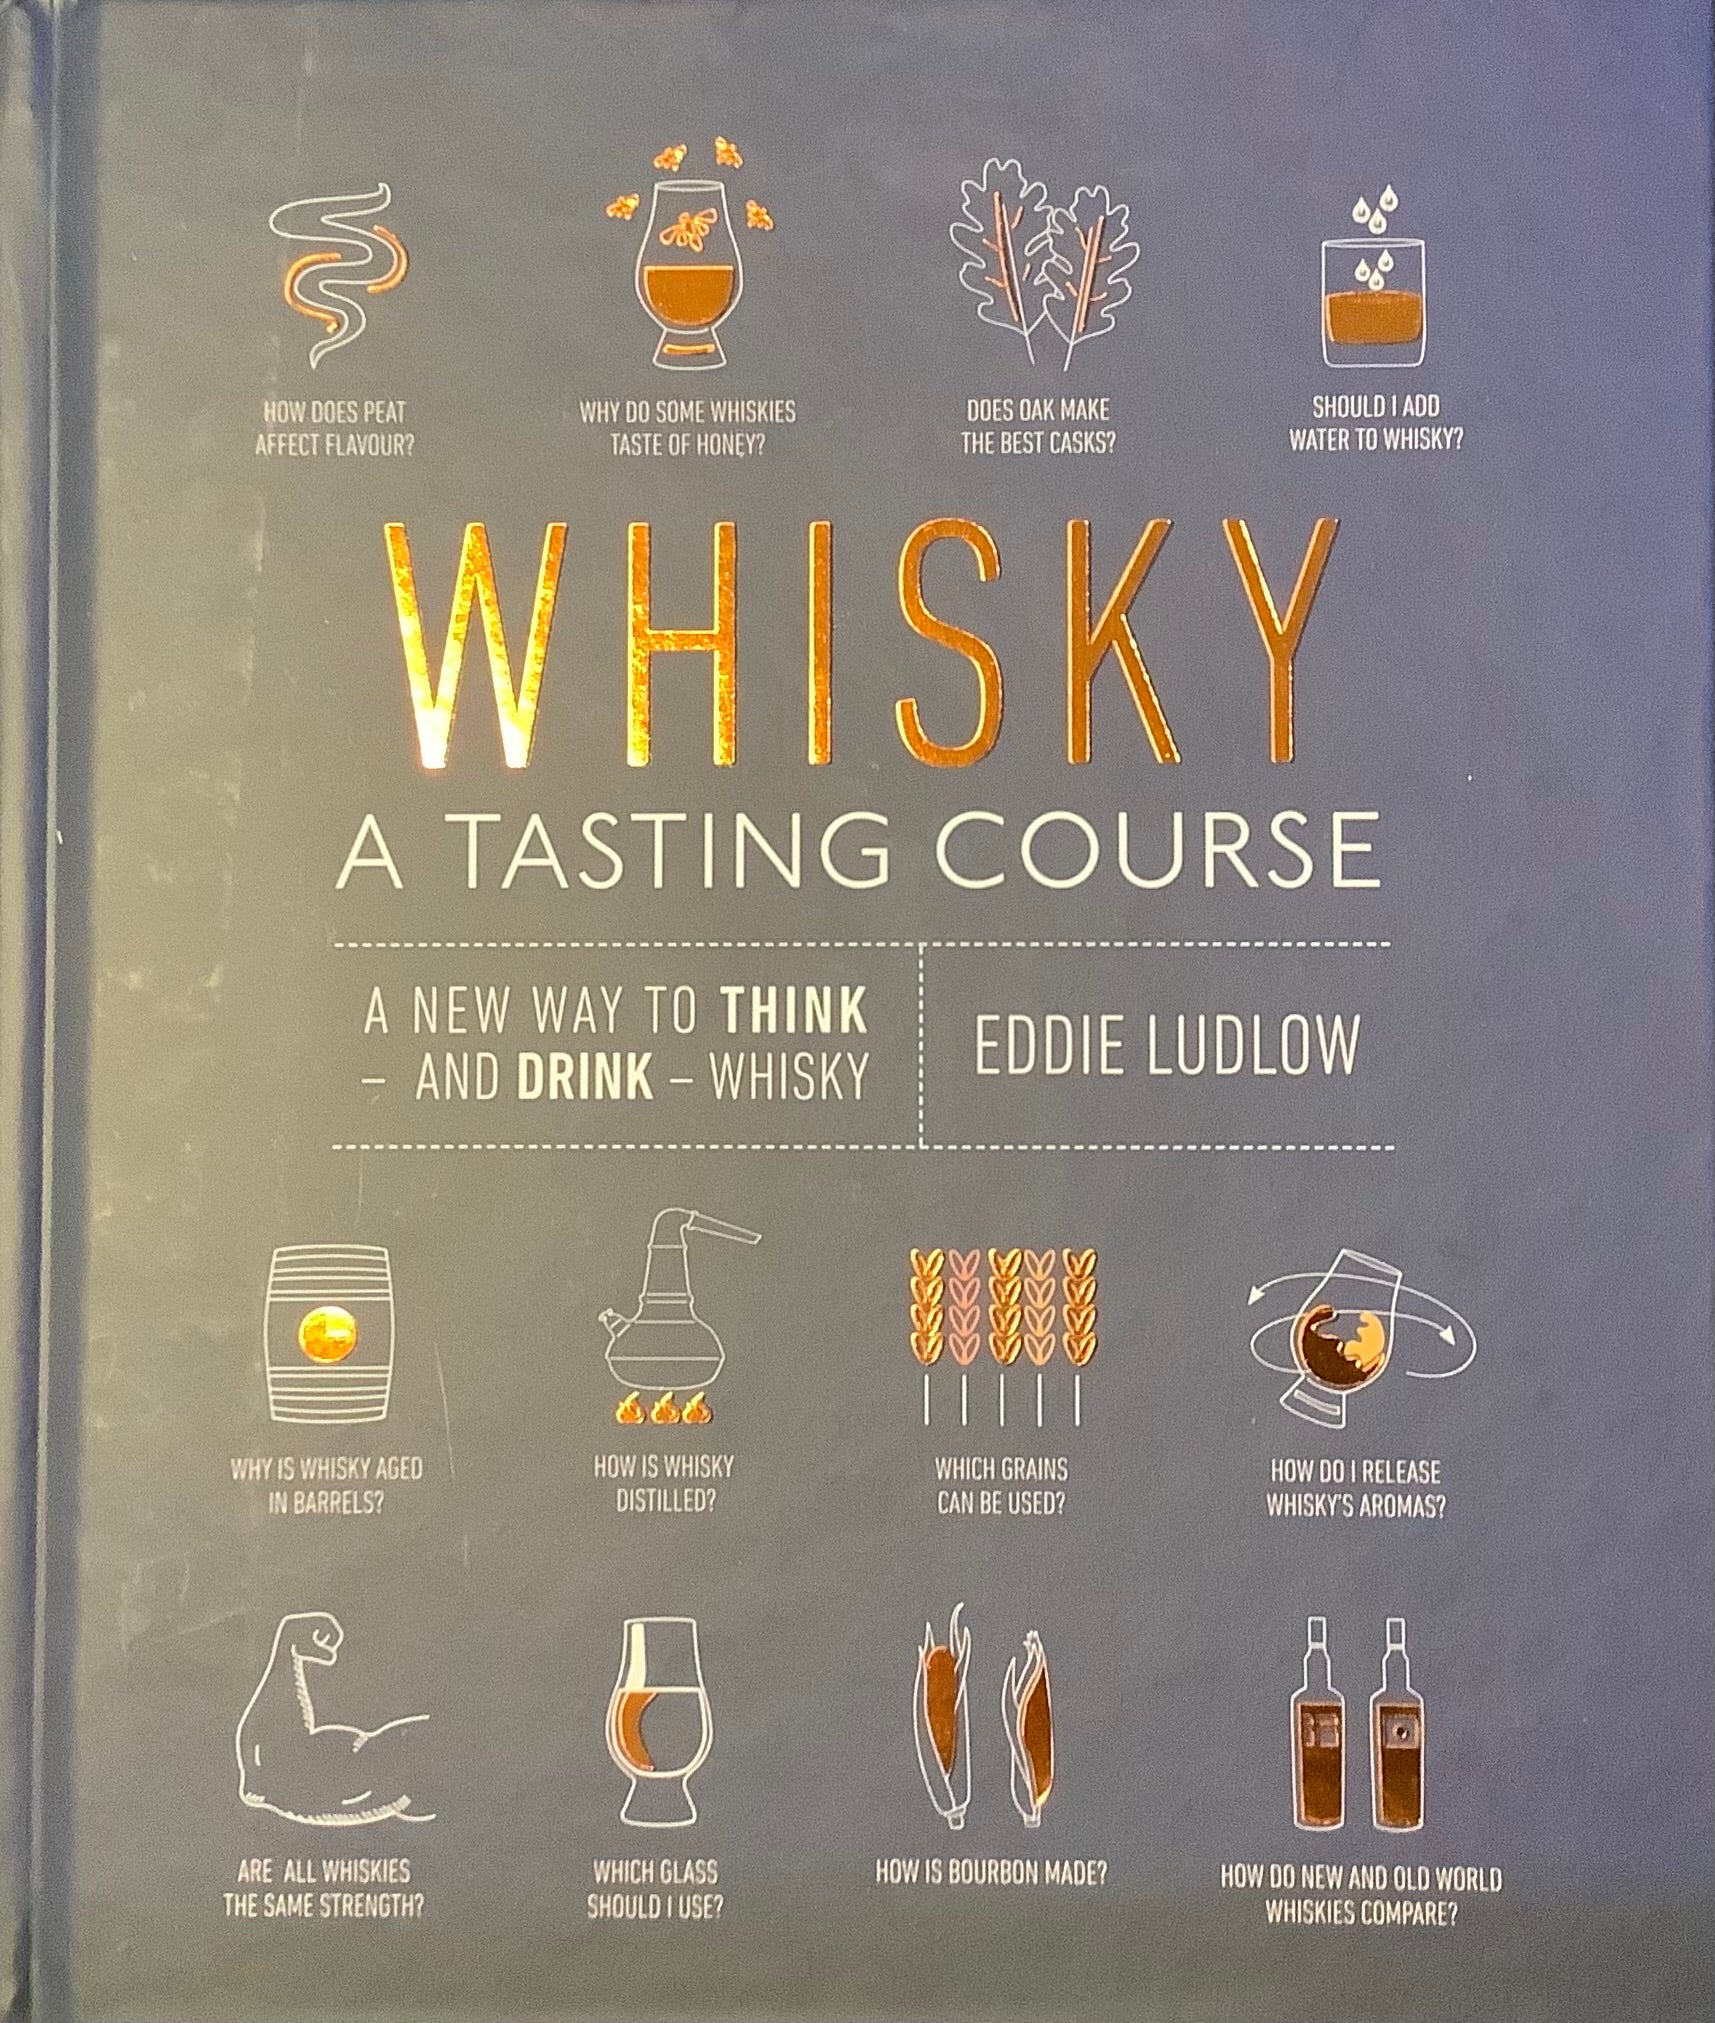 Whisky - A Tasting Course: A New Way to Think – and Drink – Whisky